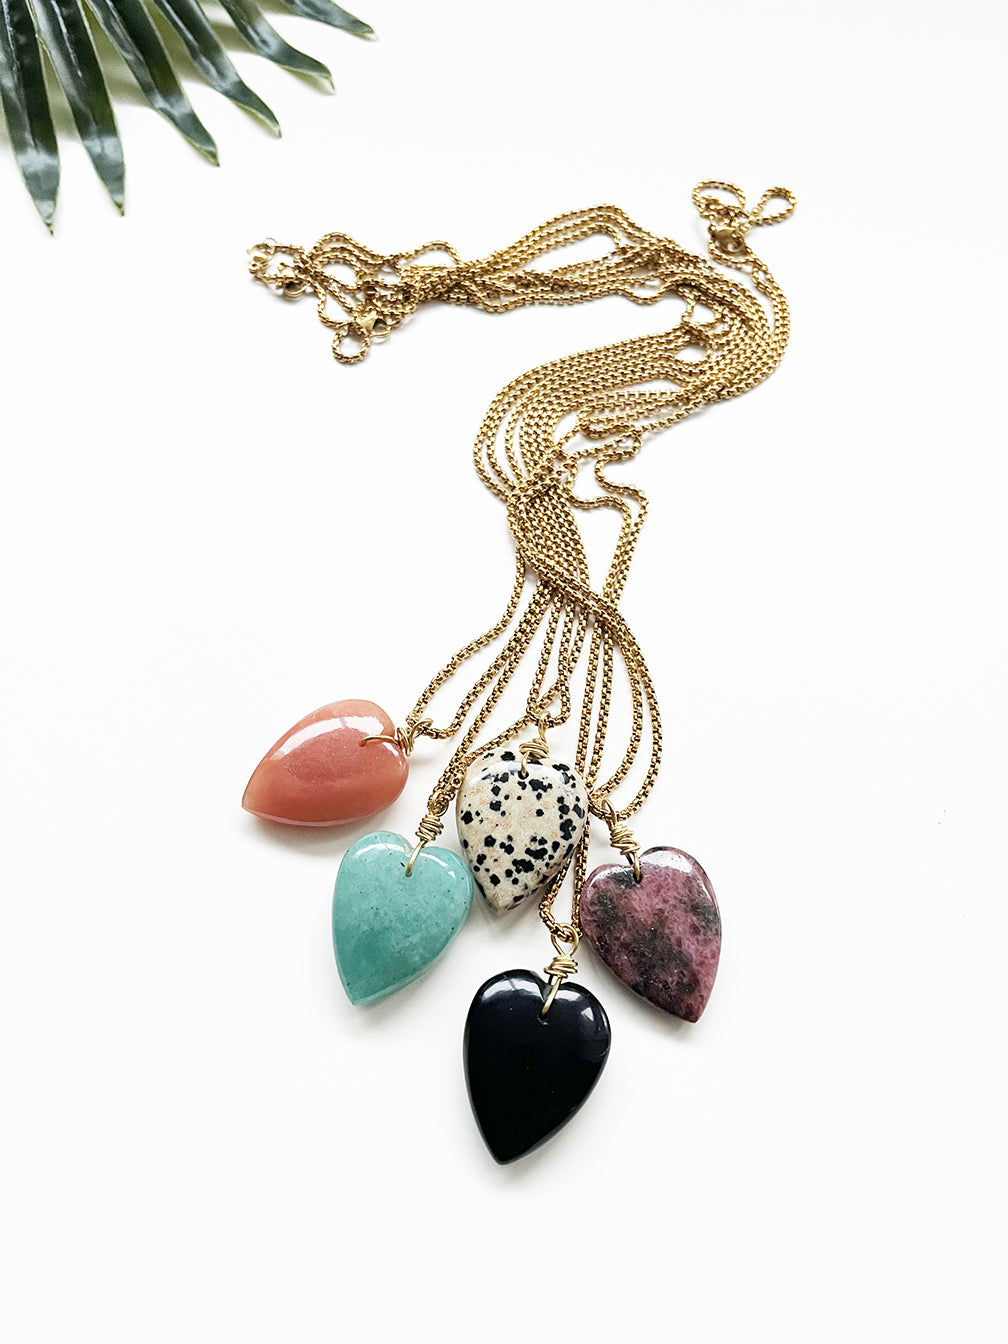 solitary touchstone necklace - gold wire wrapped